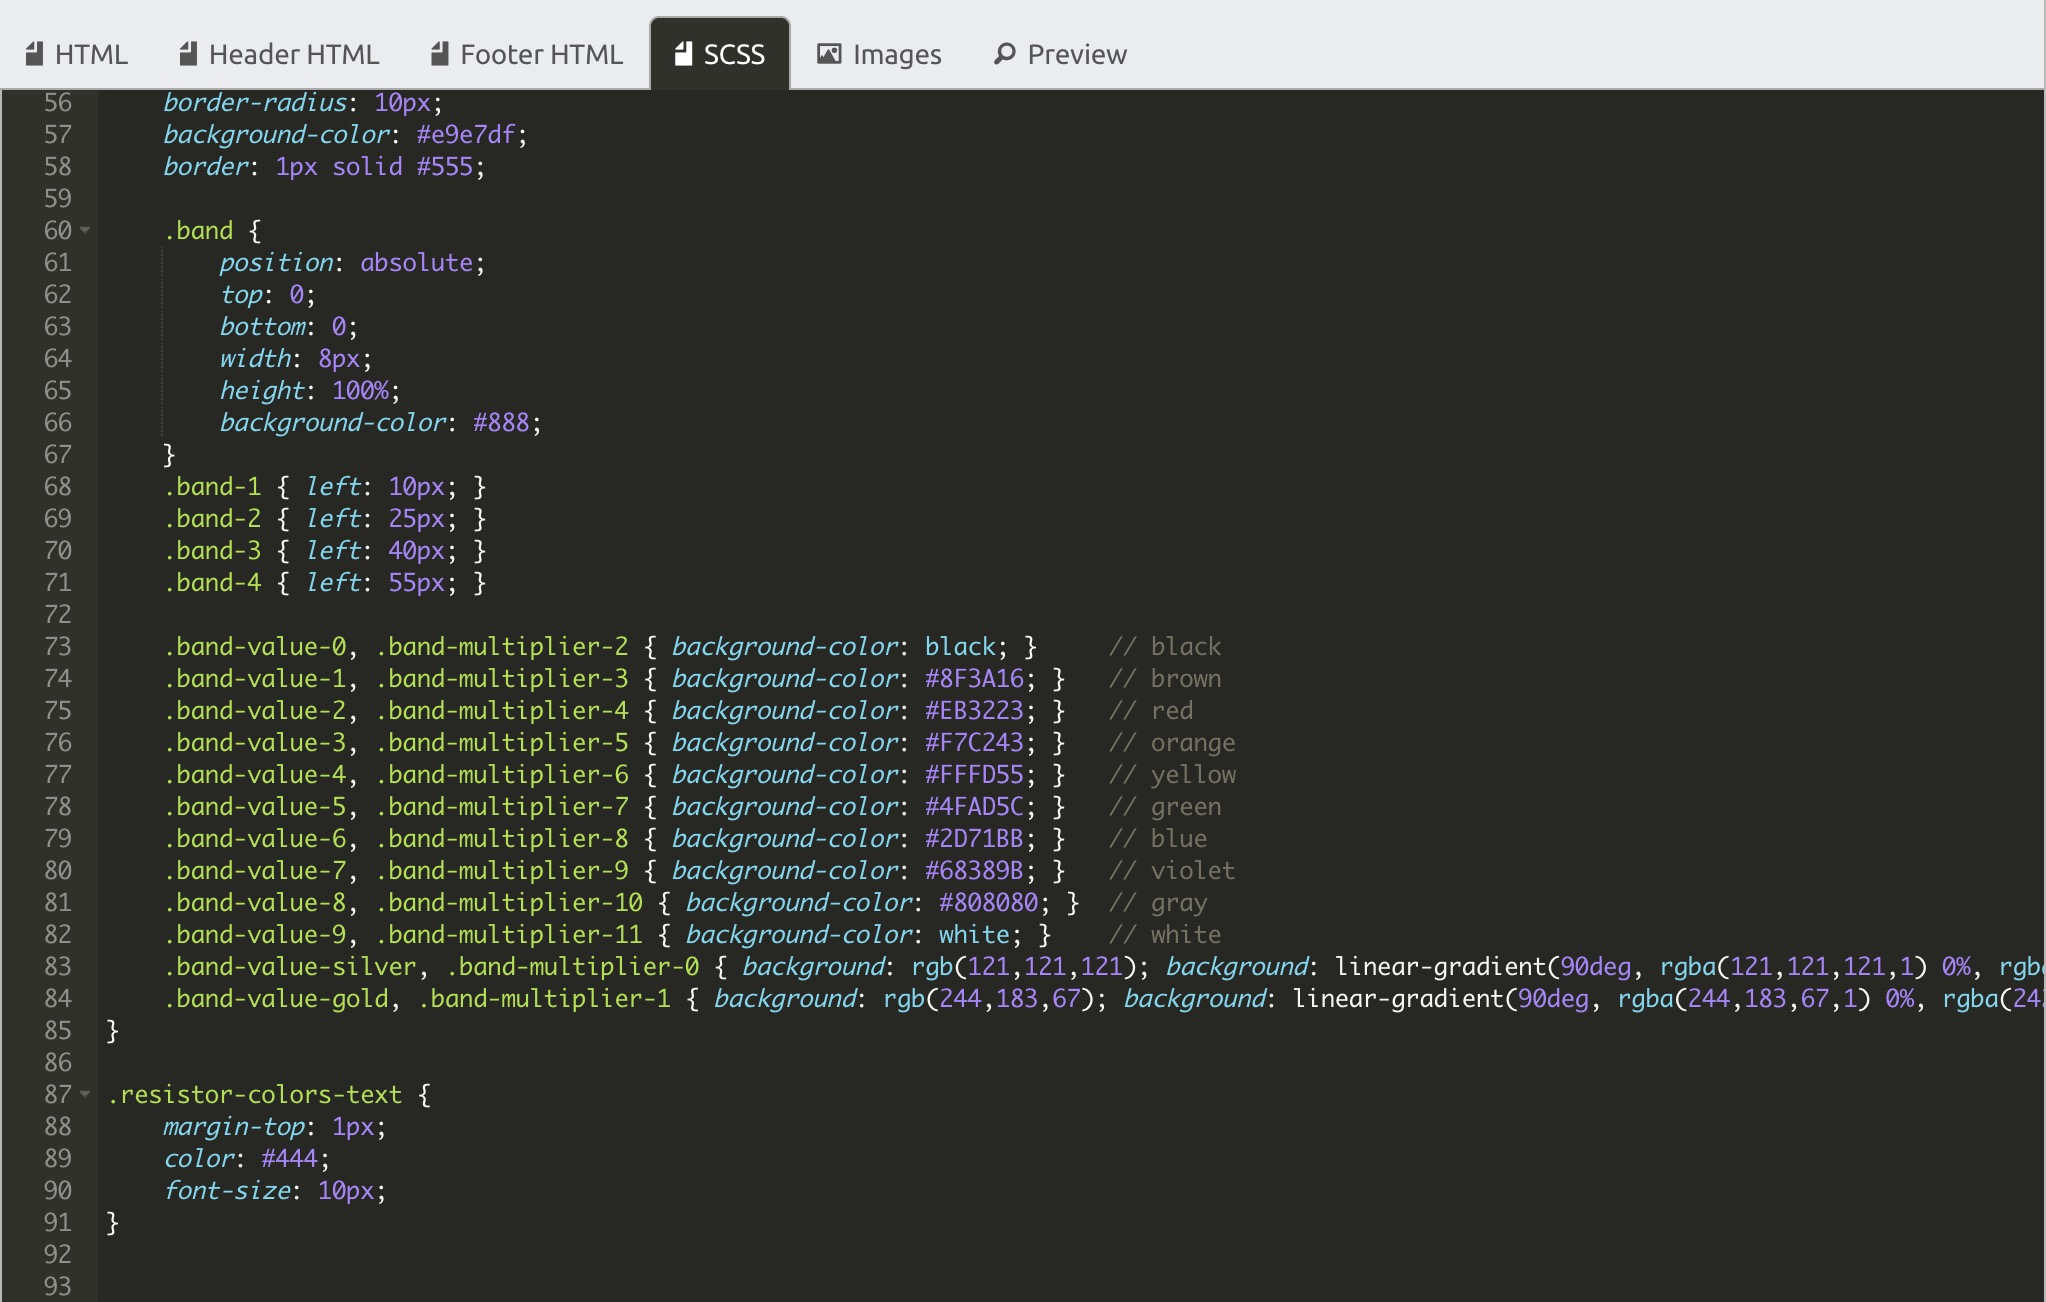 Screenshot of the DocSpring template editor showing SCSS